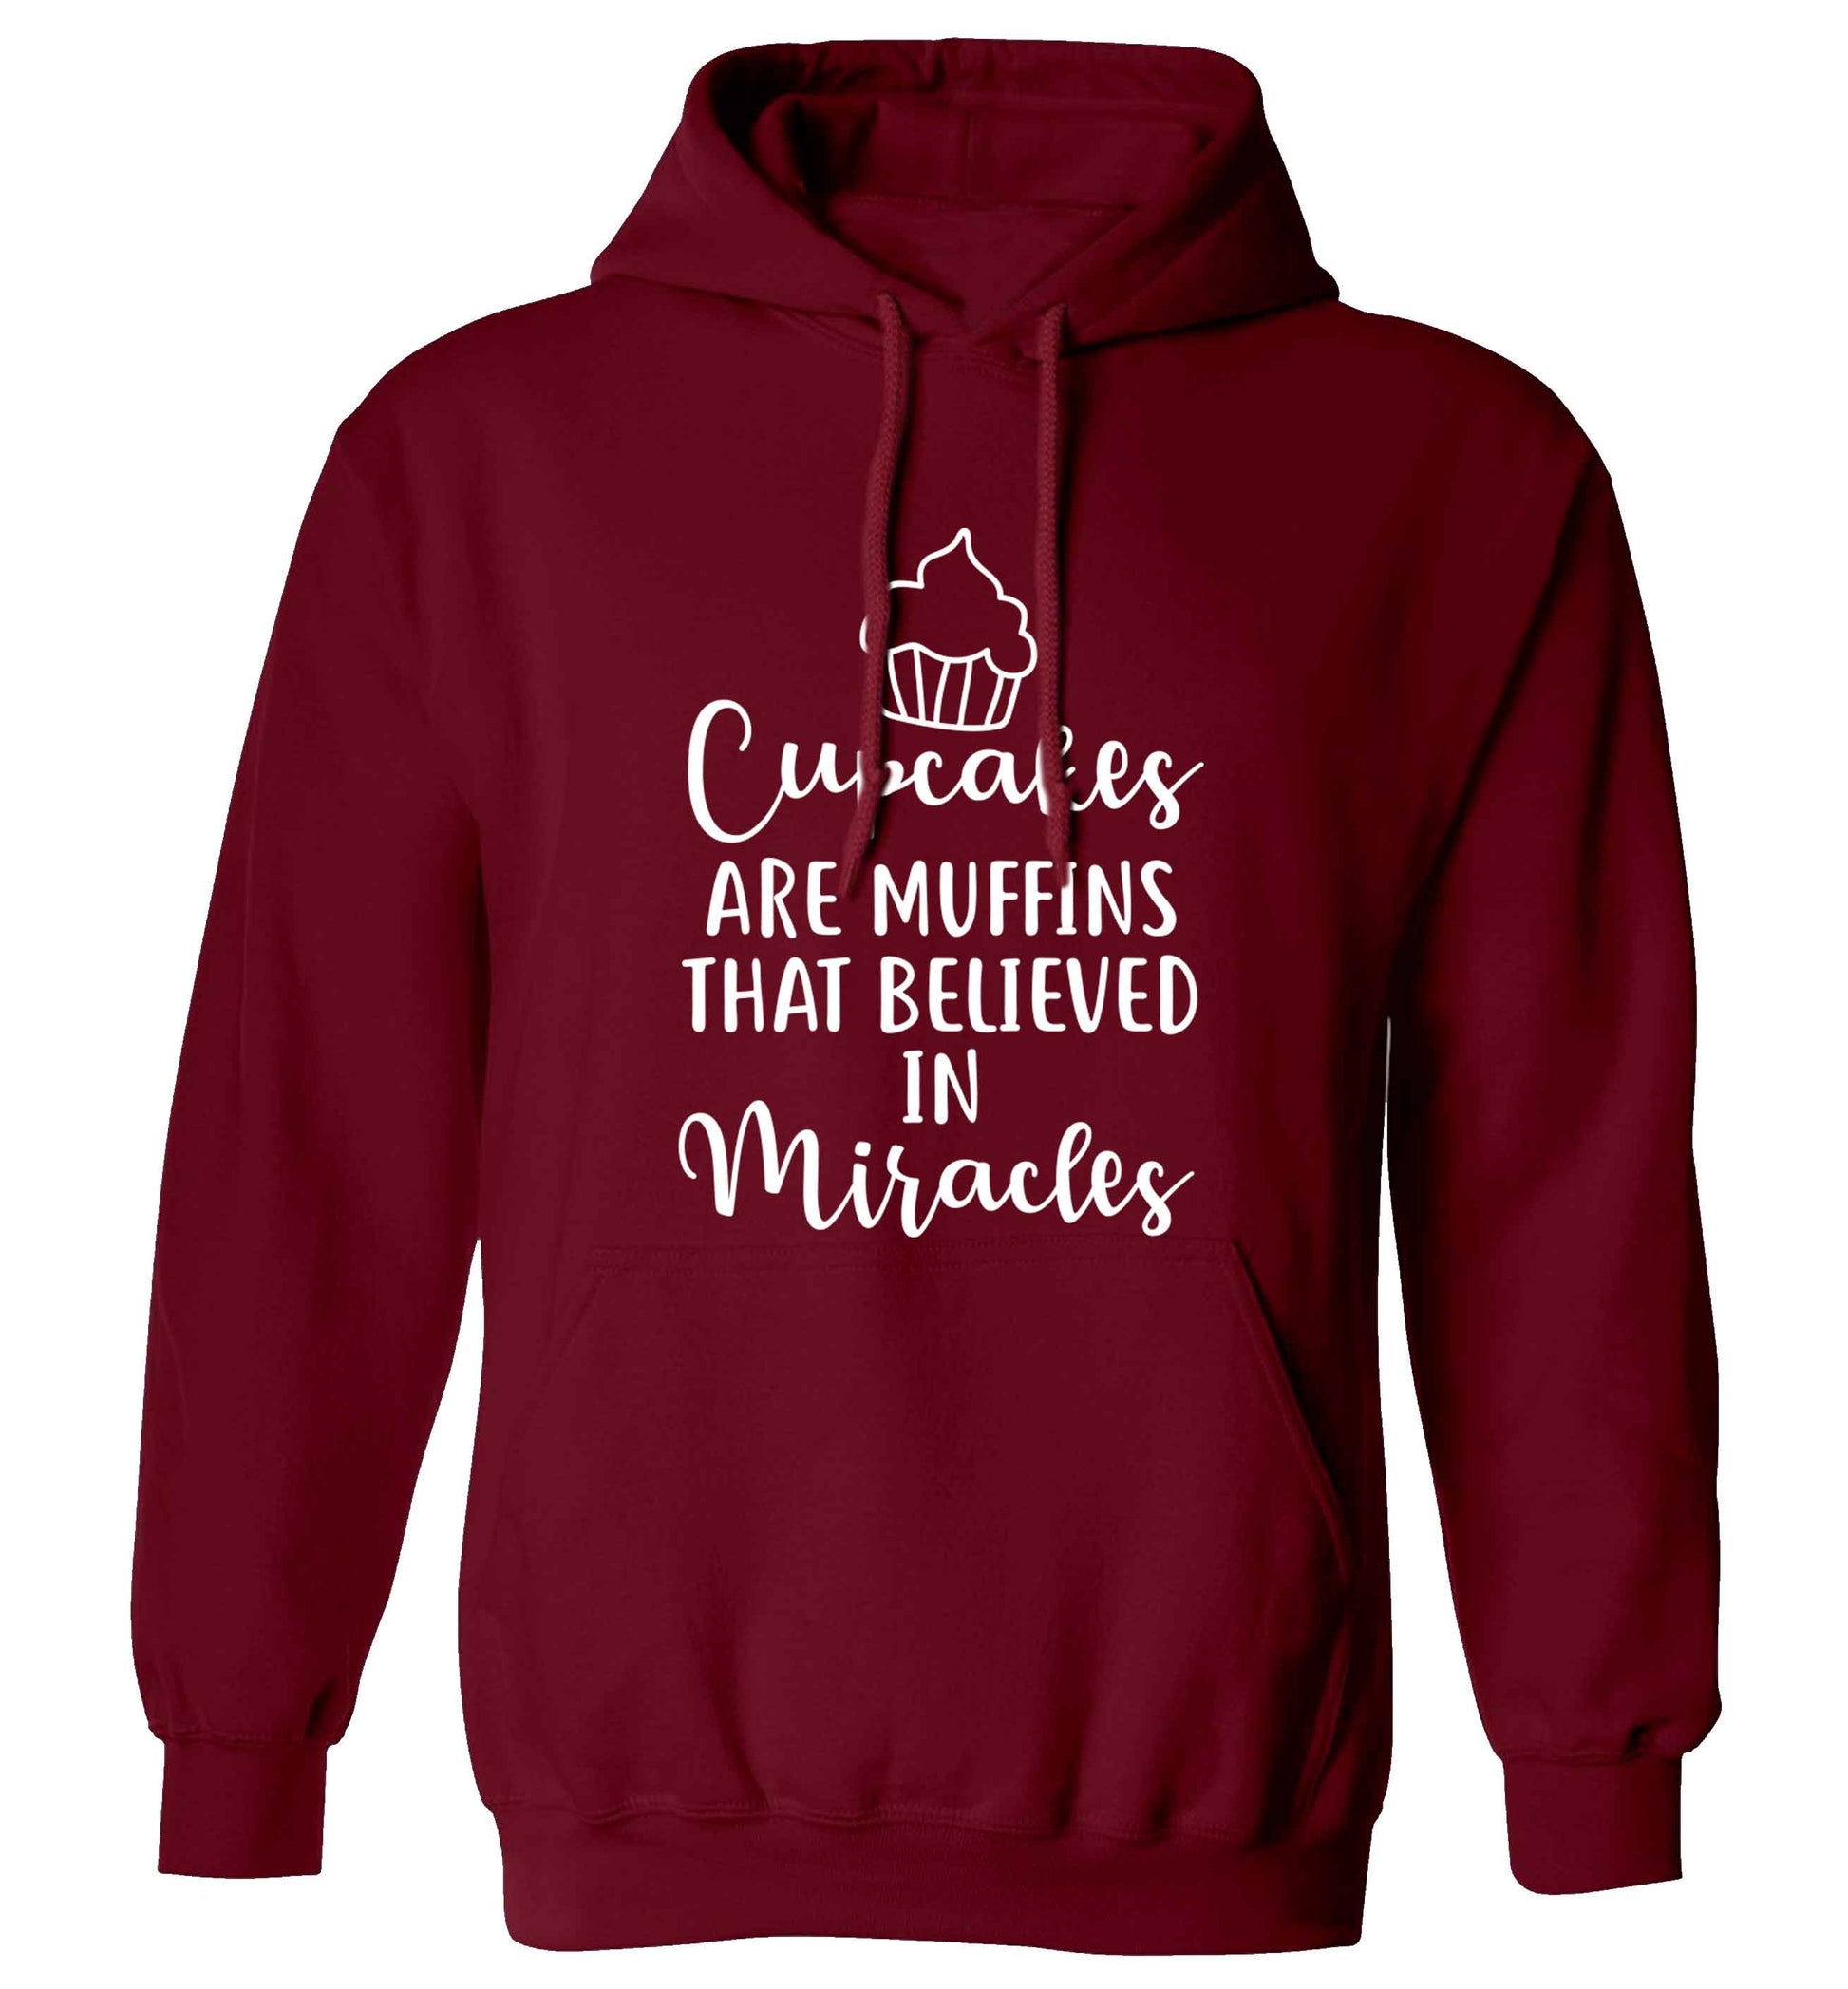 Cupcakes muffins that believed in miracles adults unisex maroon hoodie 2XL